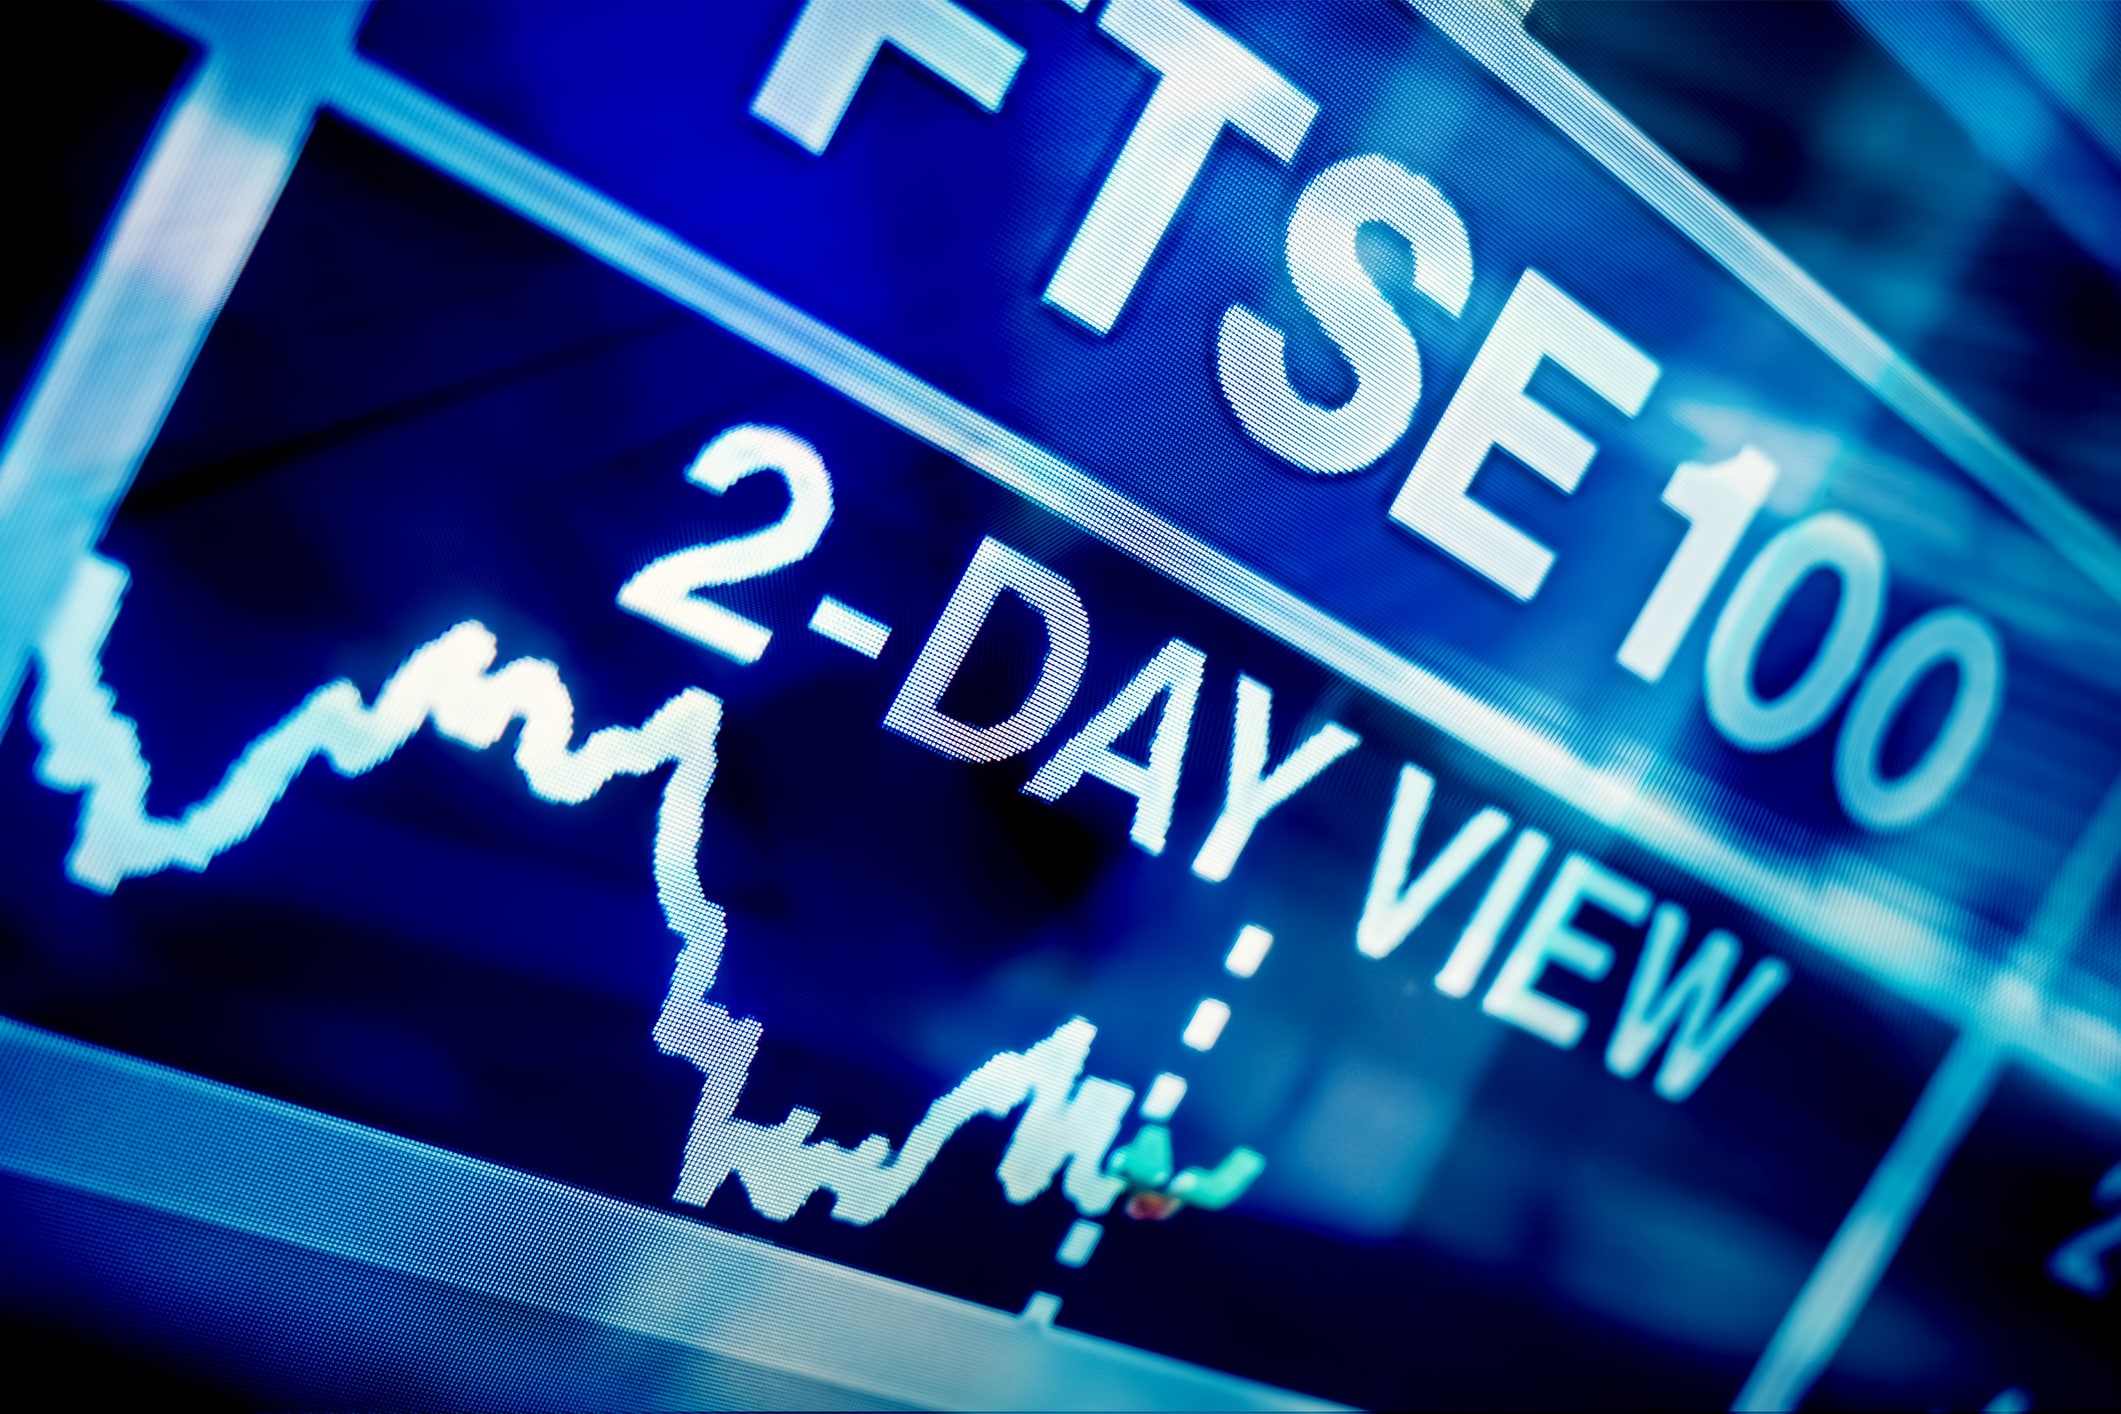 A blue screen showing a close-up of a FTSE 100 chart